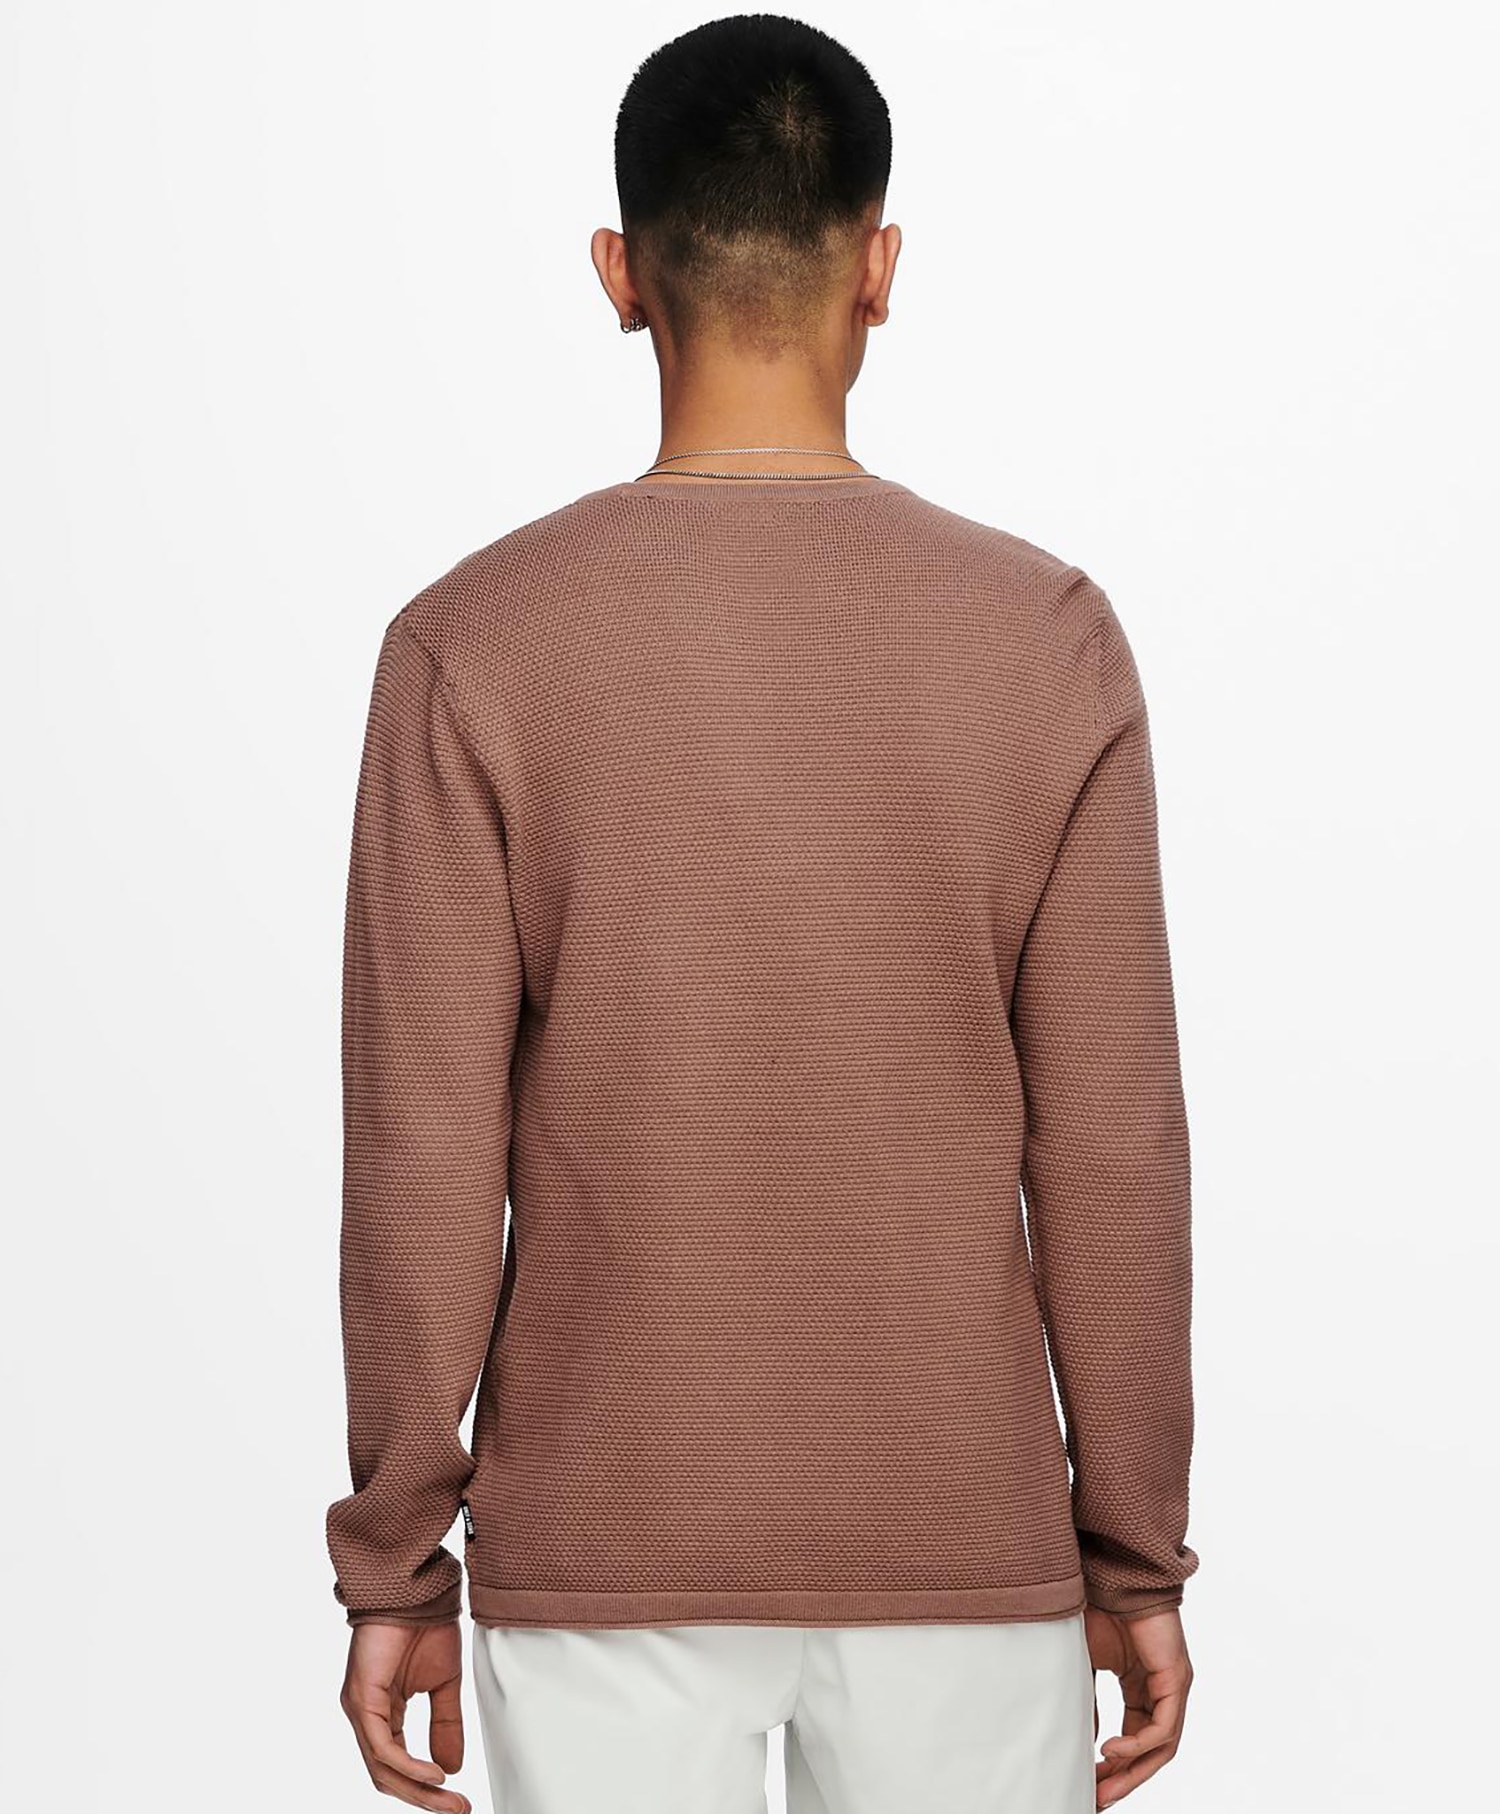 Only&Sons Panter crew neck